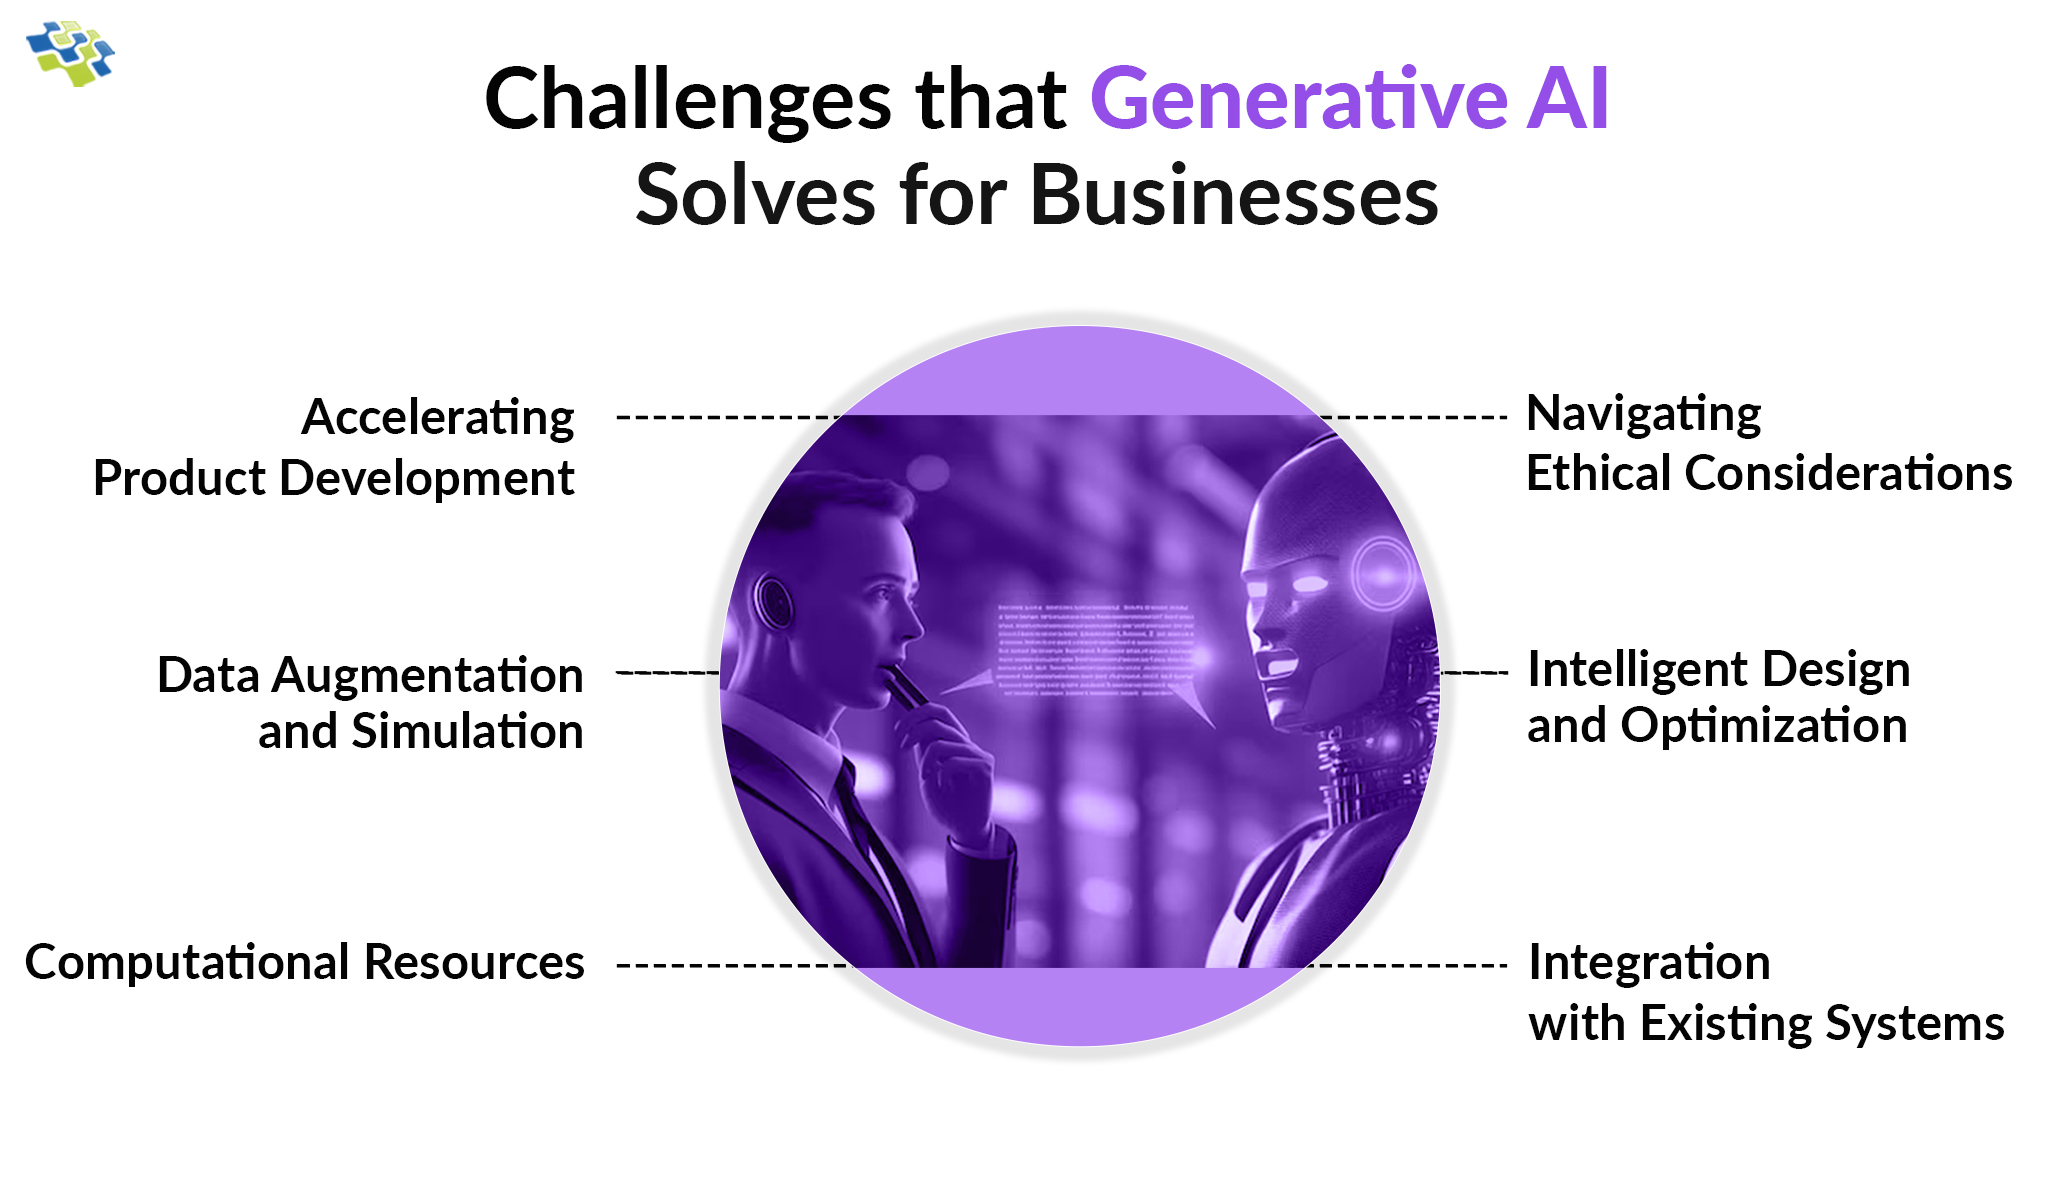 Challenges that Generative AI Solutions Solve